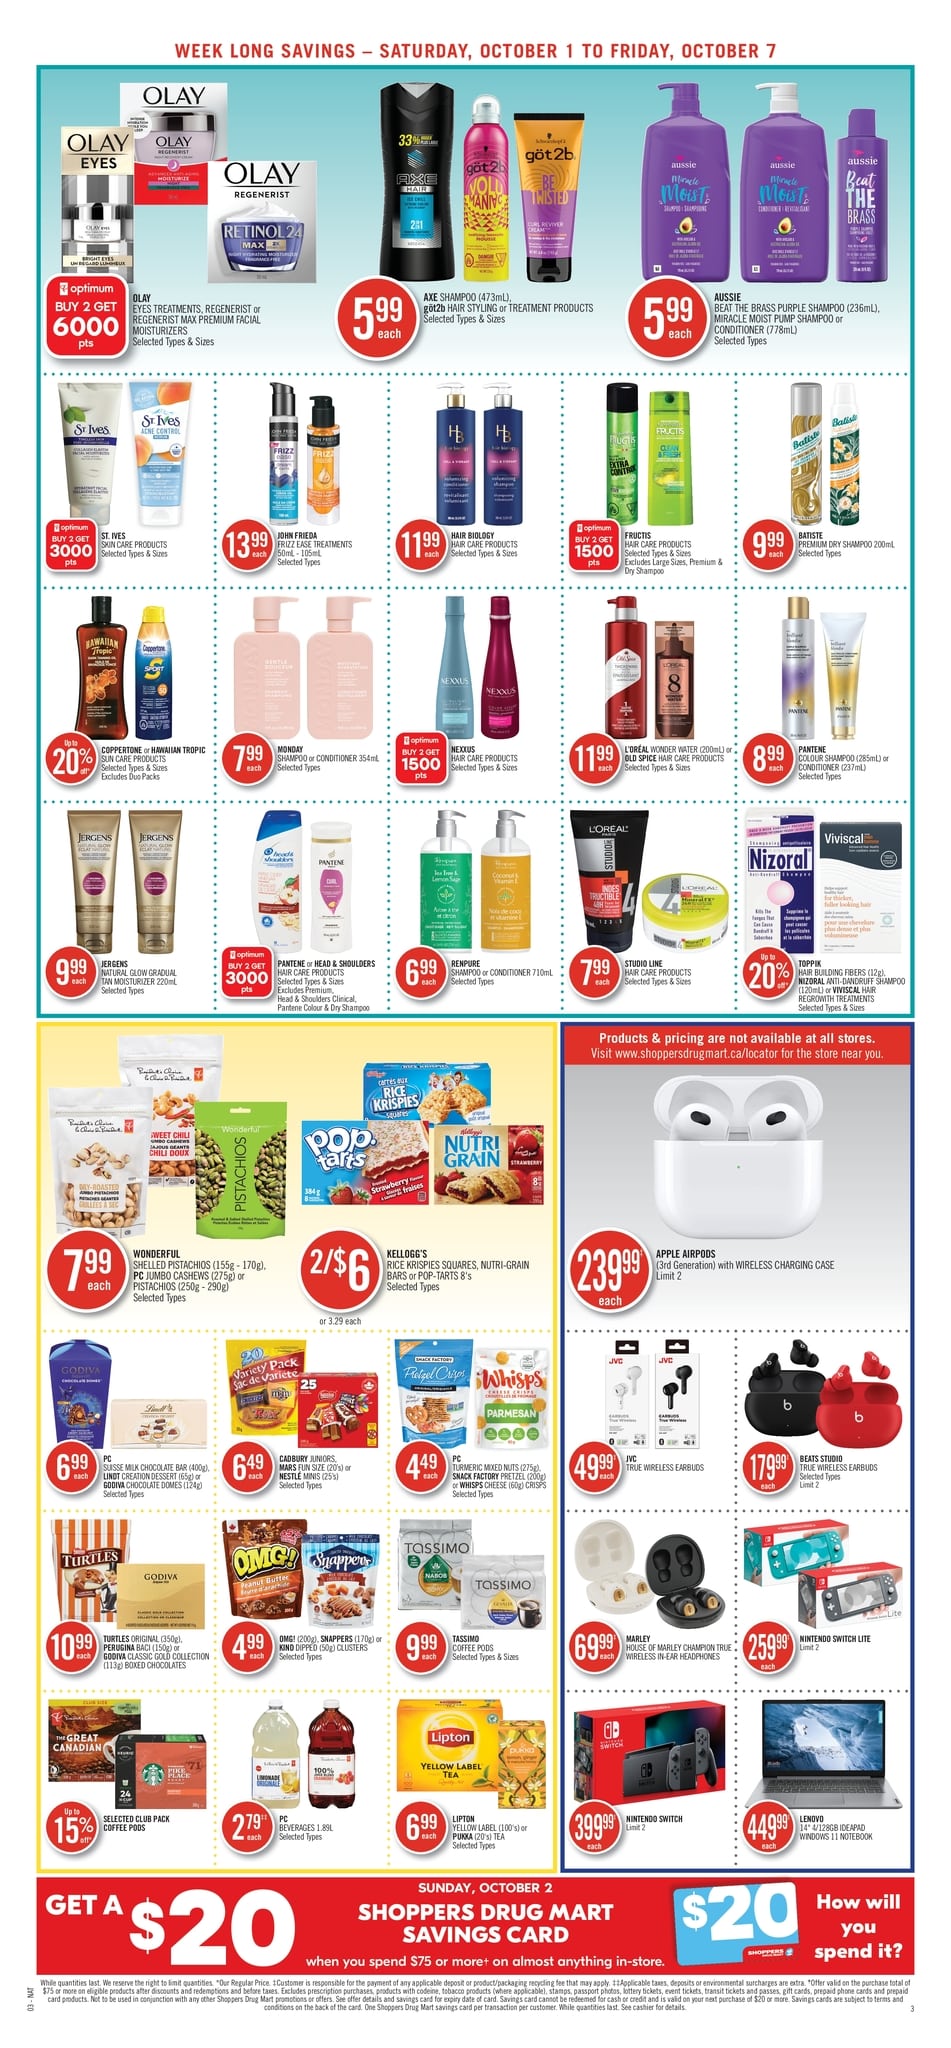 Shoppers Drug Mart - Weekly Flyer Specials - Page 10